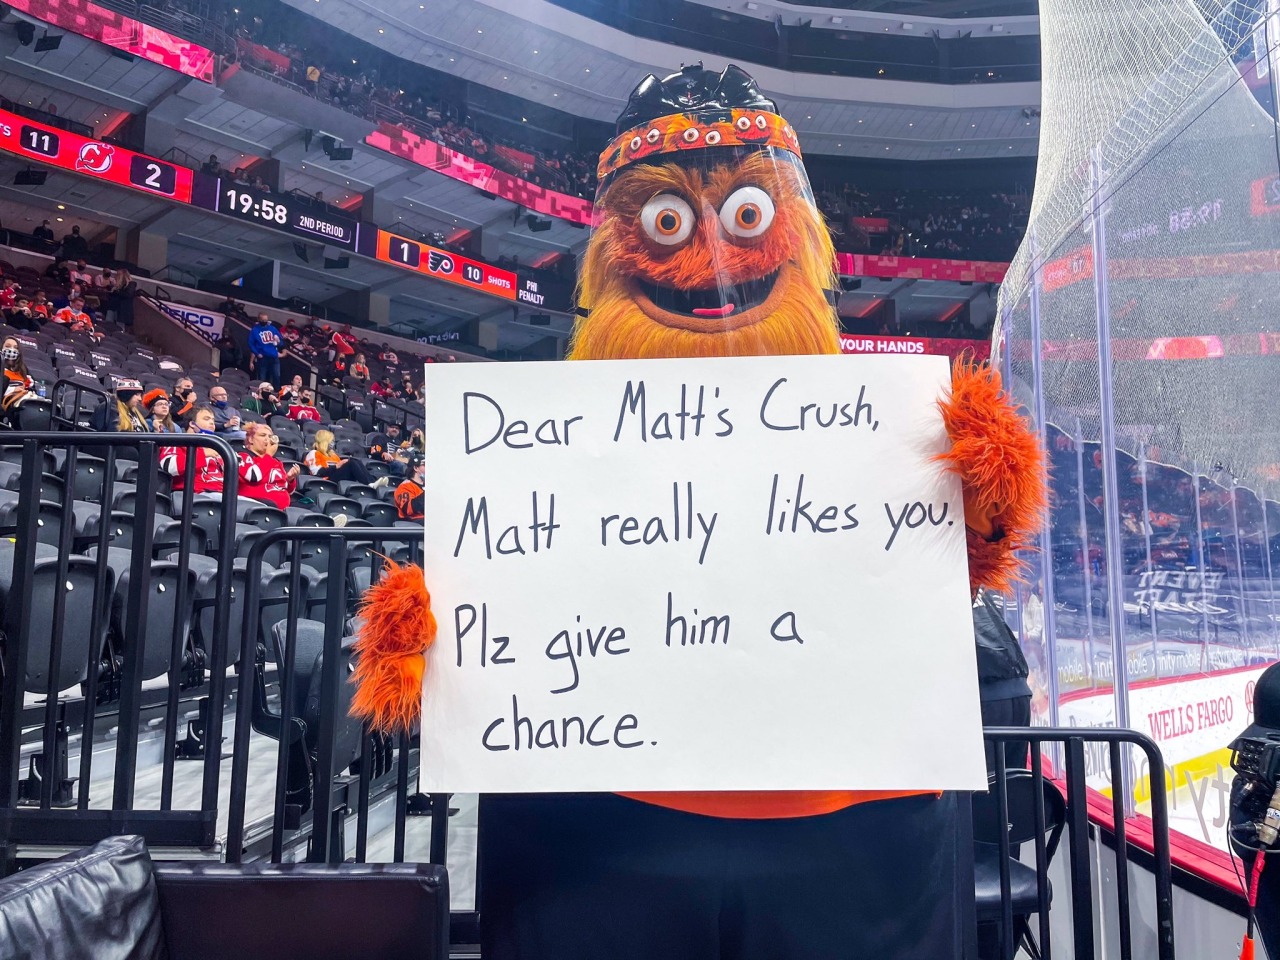 Sex officialgritty: pictures